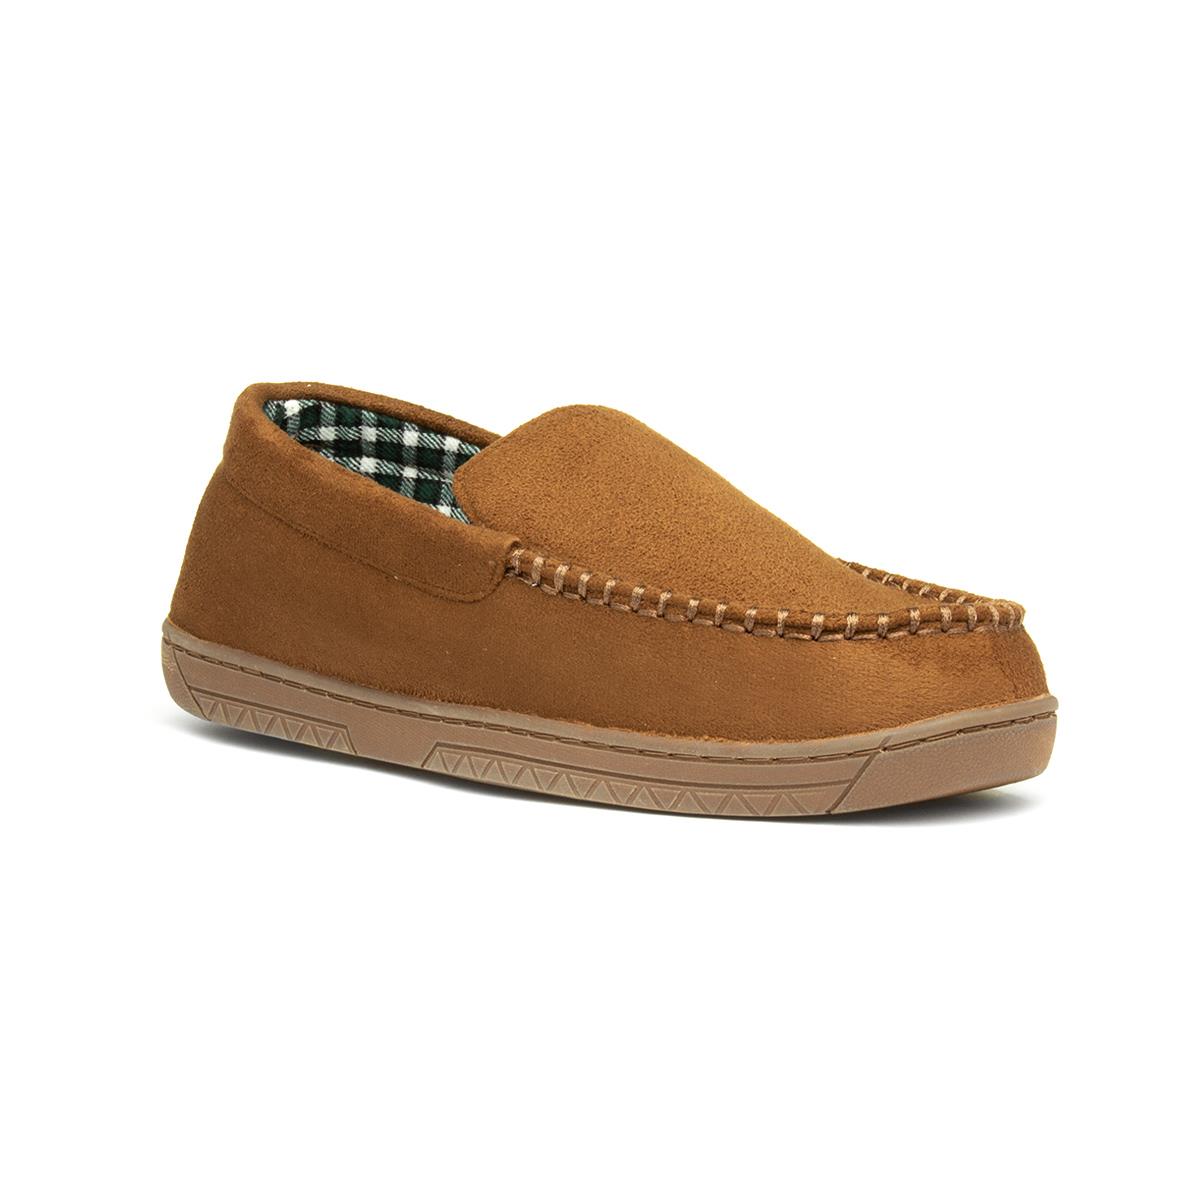 The Slipper Company Mens Moccasin Brown 